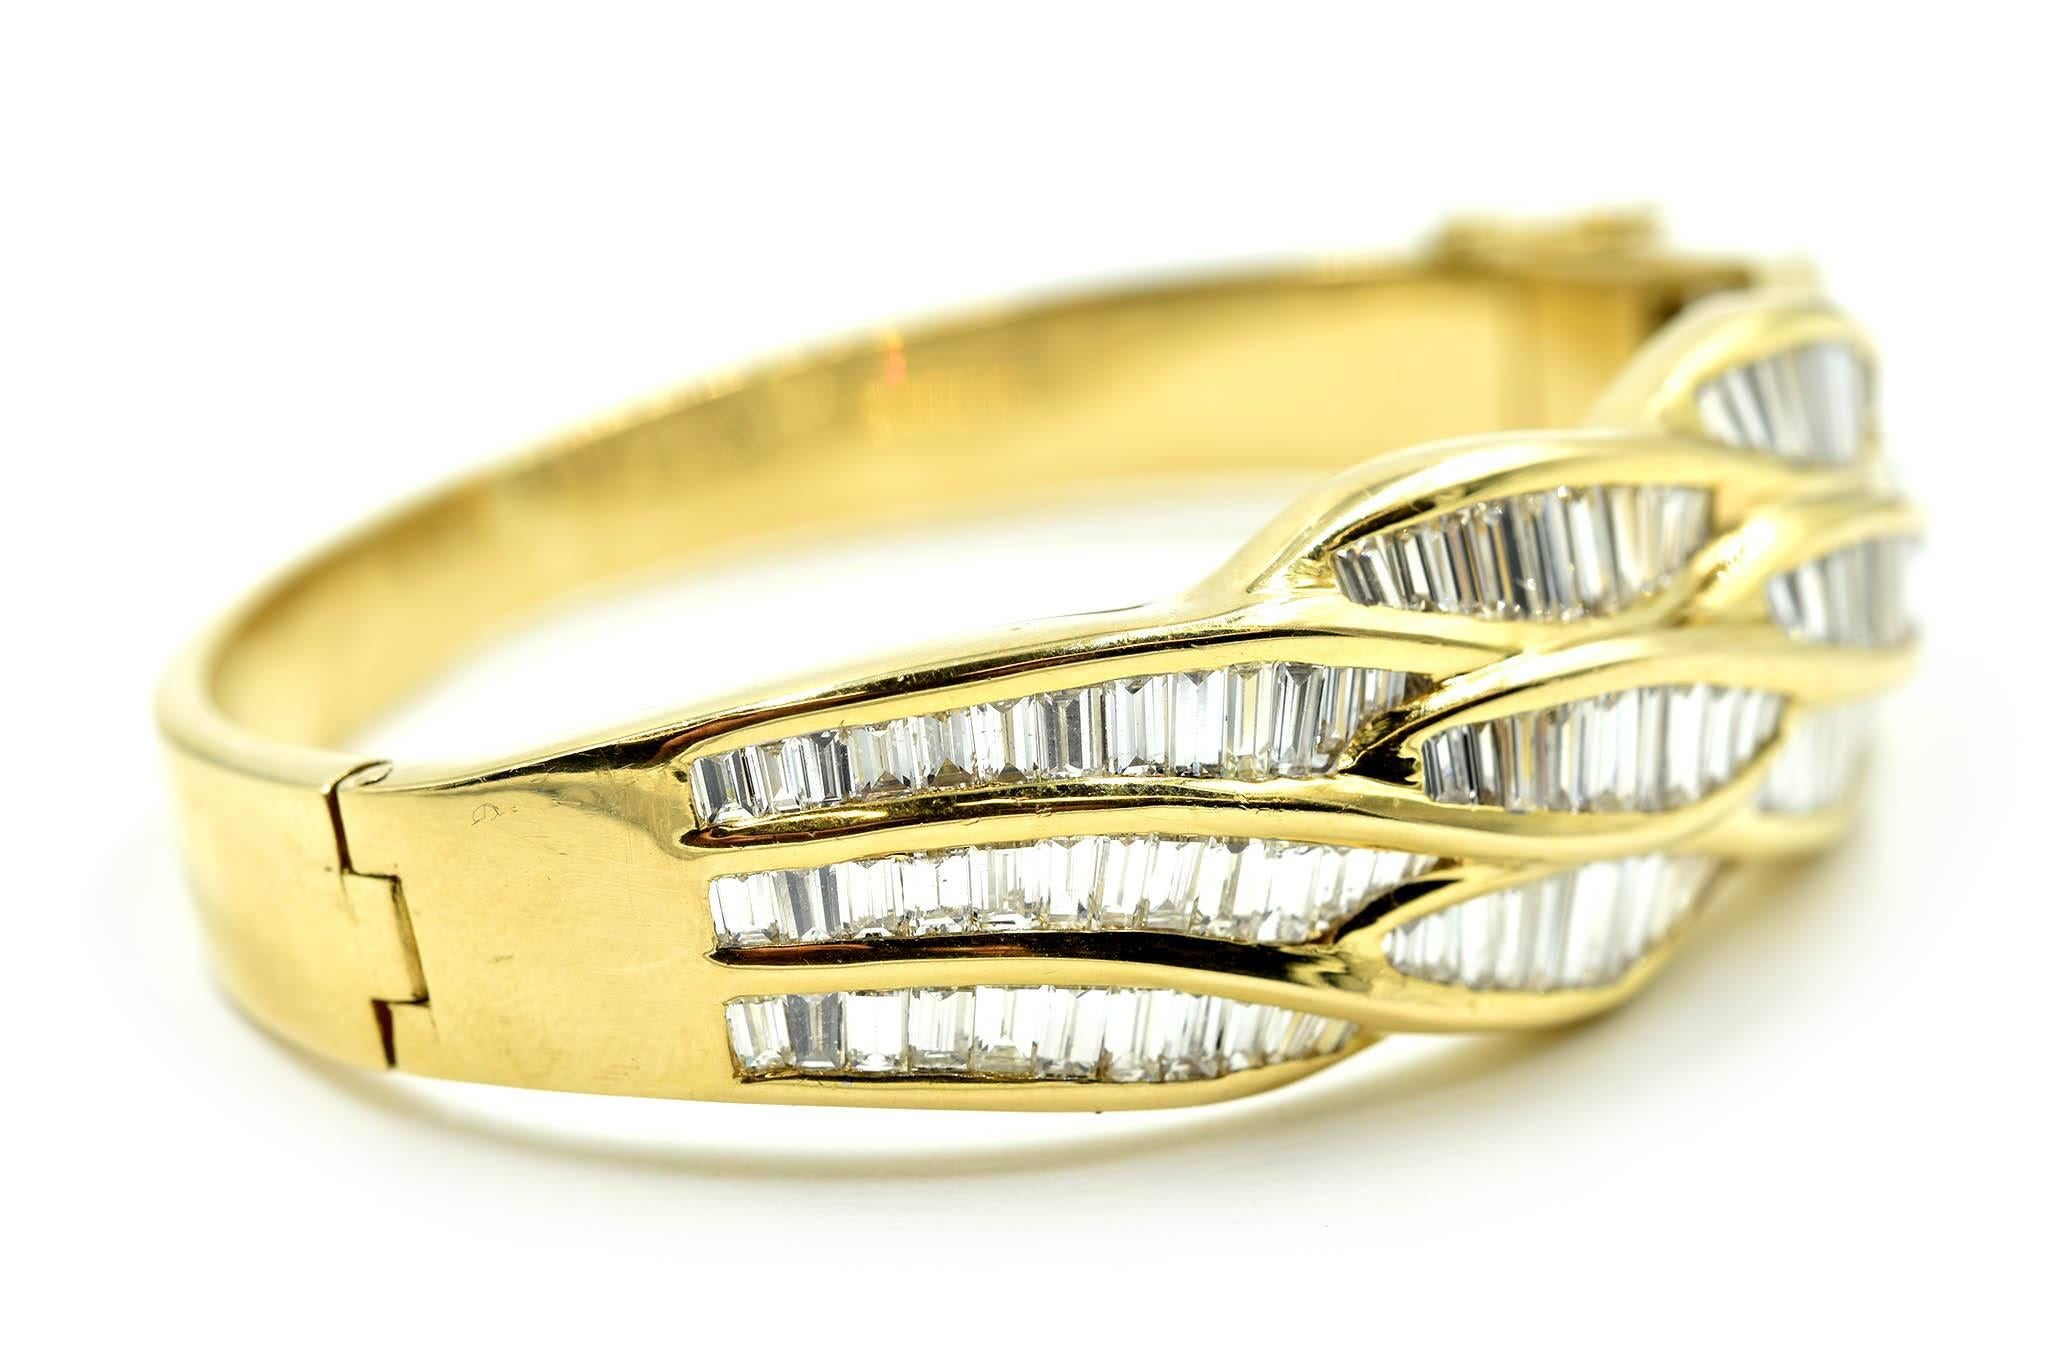 This gorgeous bangle is made in solid 18k yellow gold. The bangle features three rows of channel-set baguette diamonds for a total weight of 6.50 carats. The diamonds are graded G in color and VS2 in clarity. The bracelet measures 2.46mm wide, and